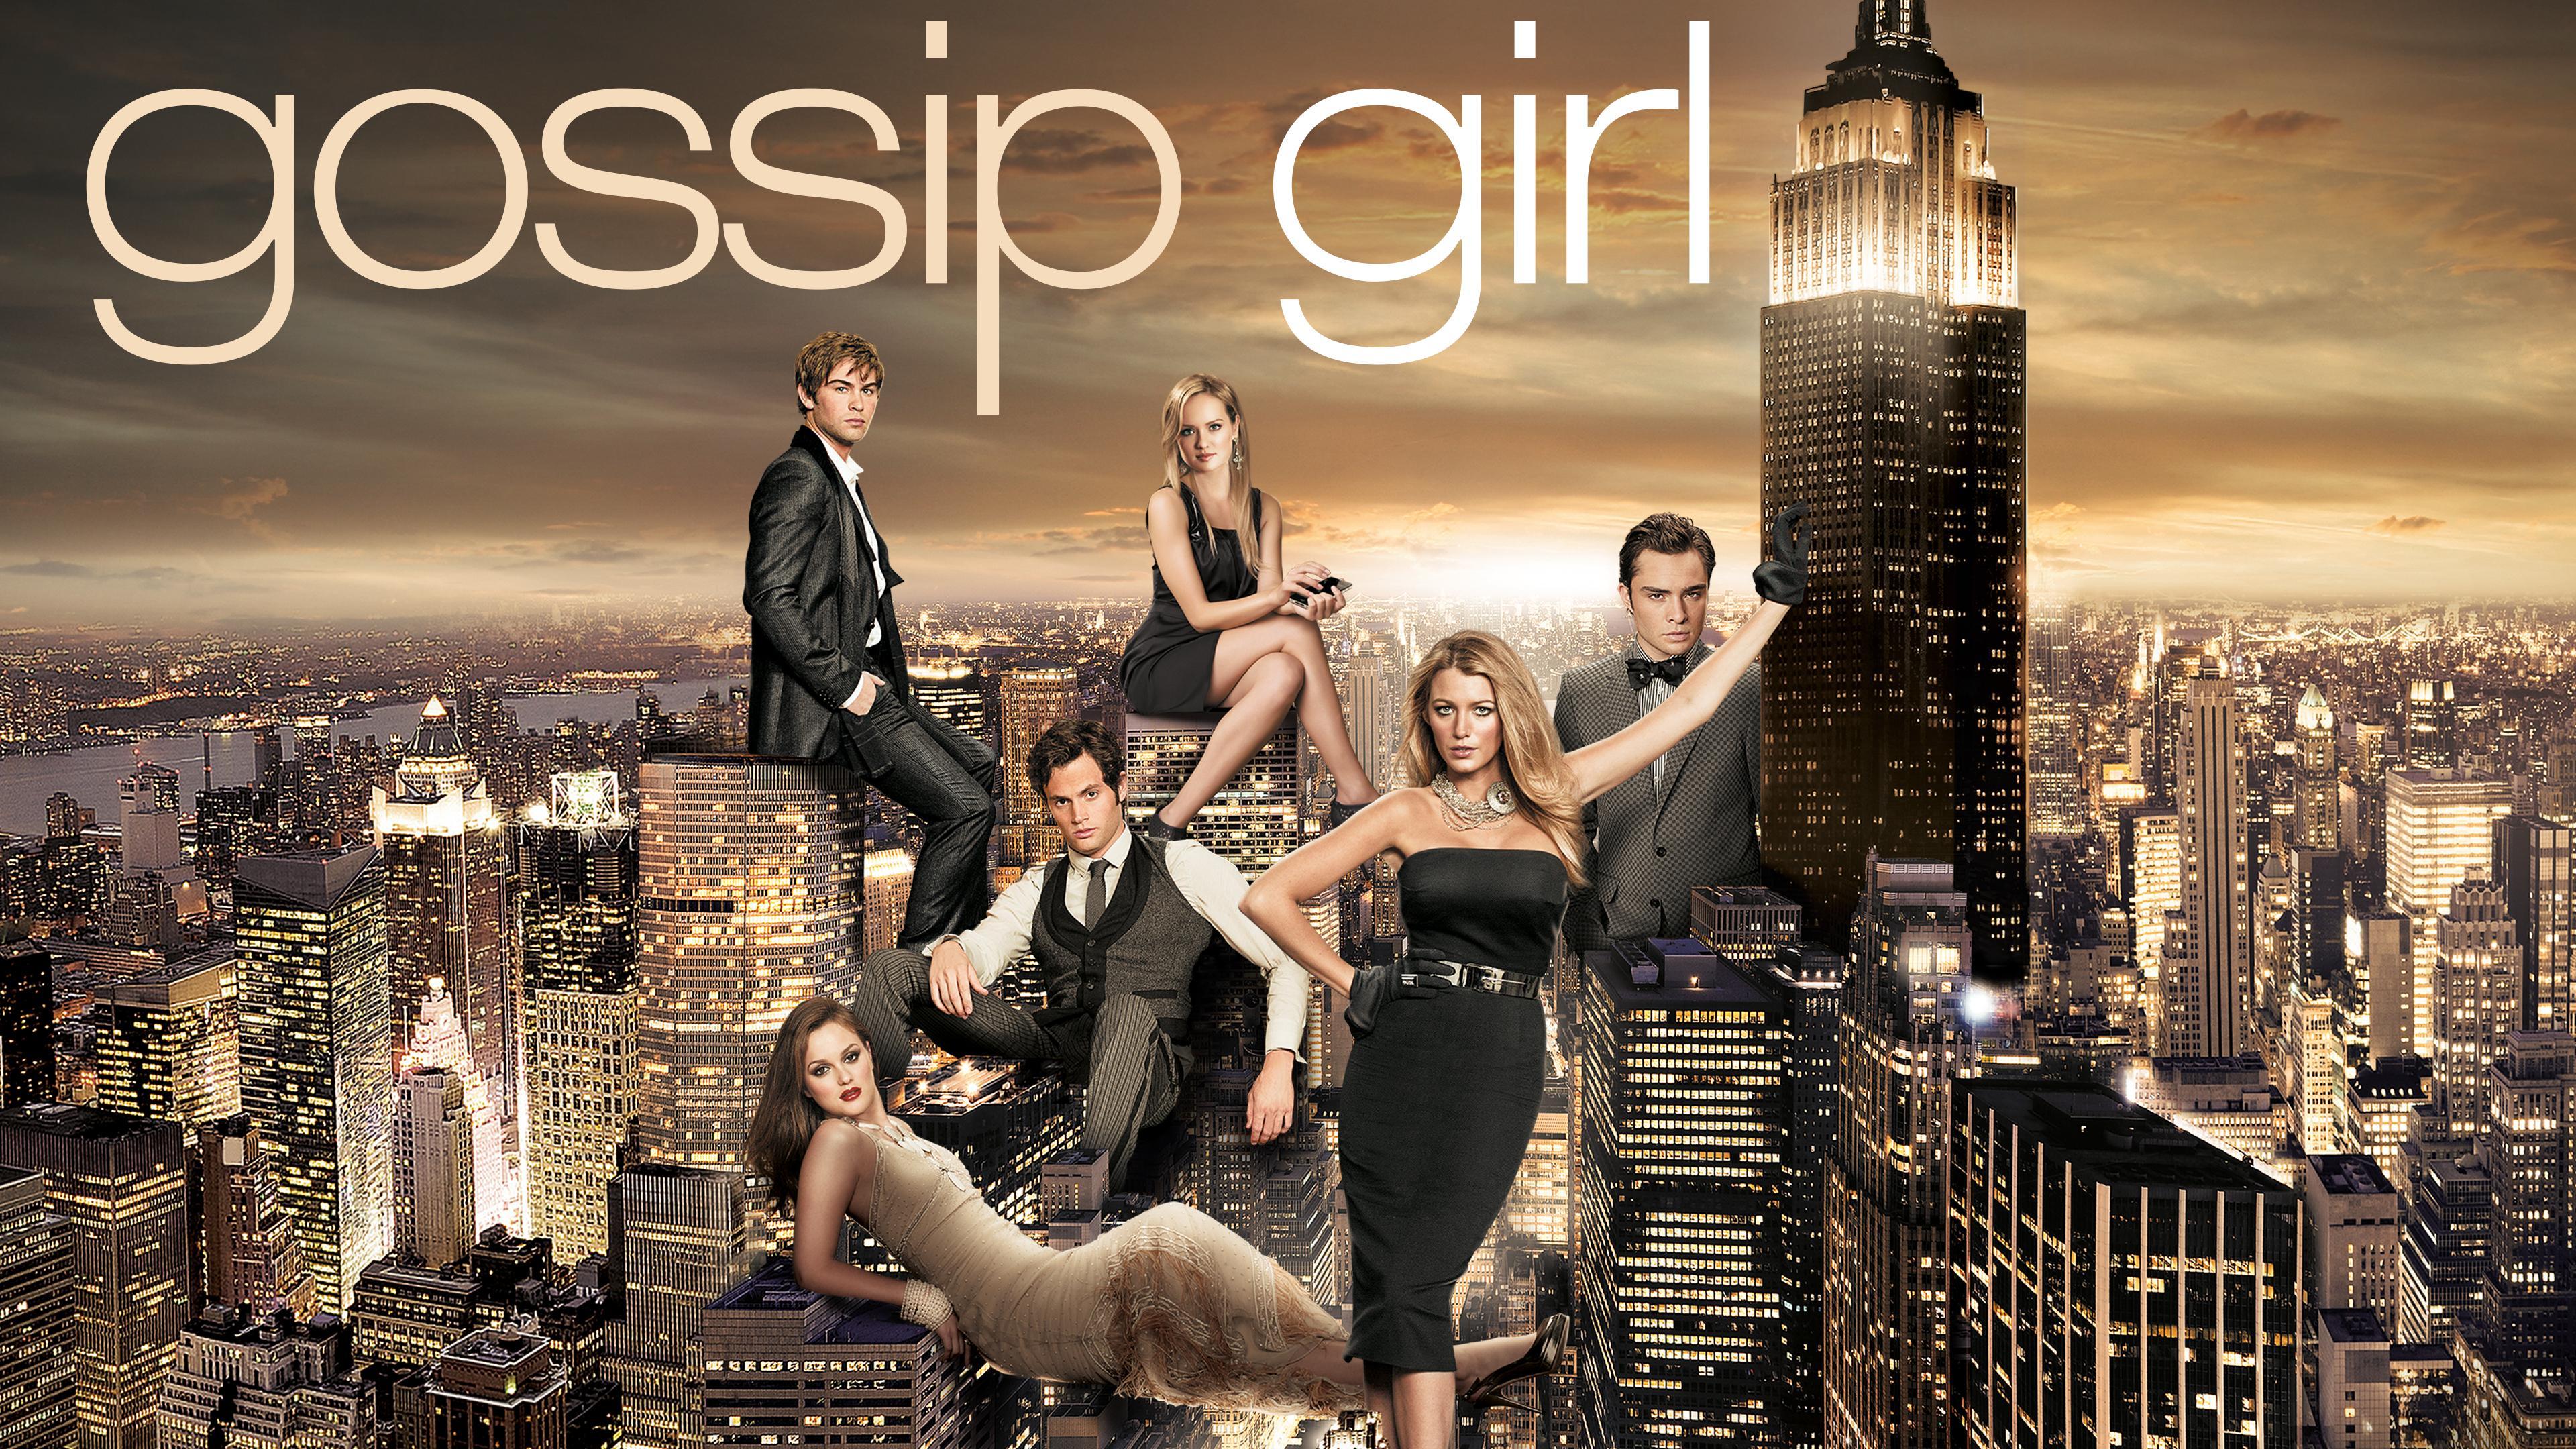 Gossip Girl Movie Poster Decor for Any Room